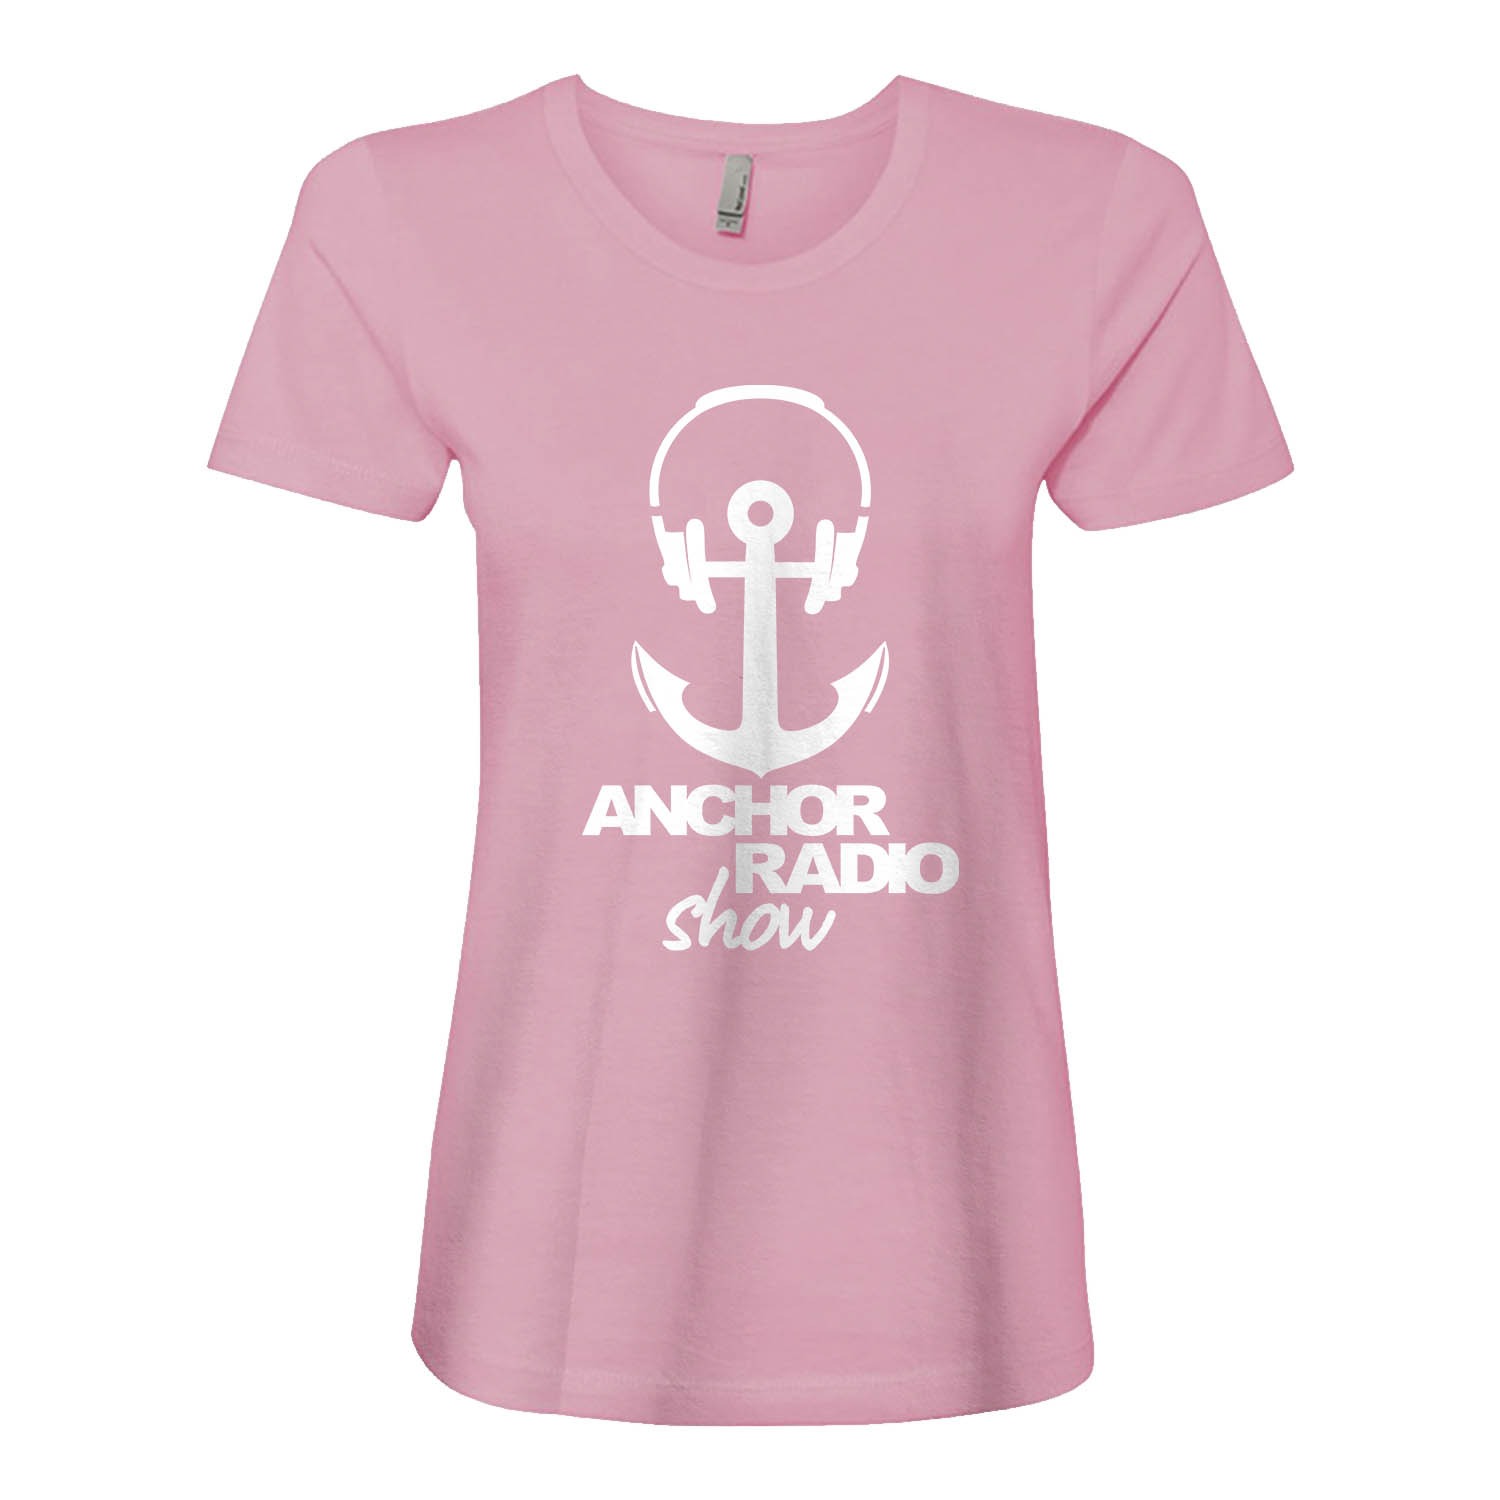 Anchor Radio Show Large Anchor Ladies Fitted Tee, The Troprock Shop